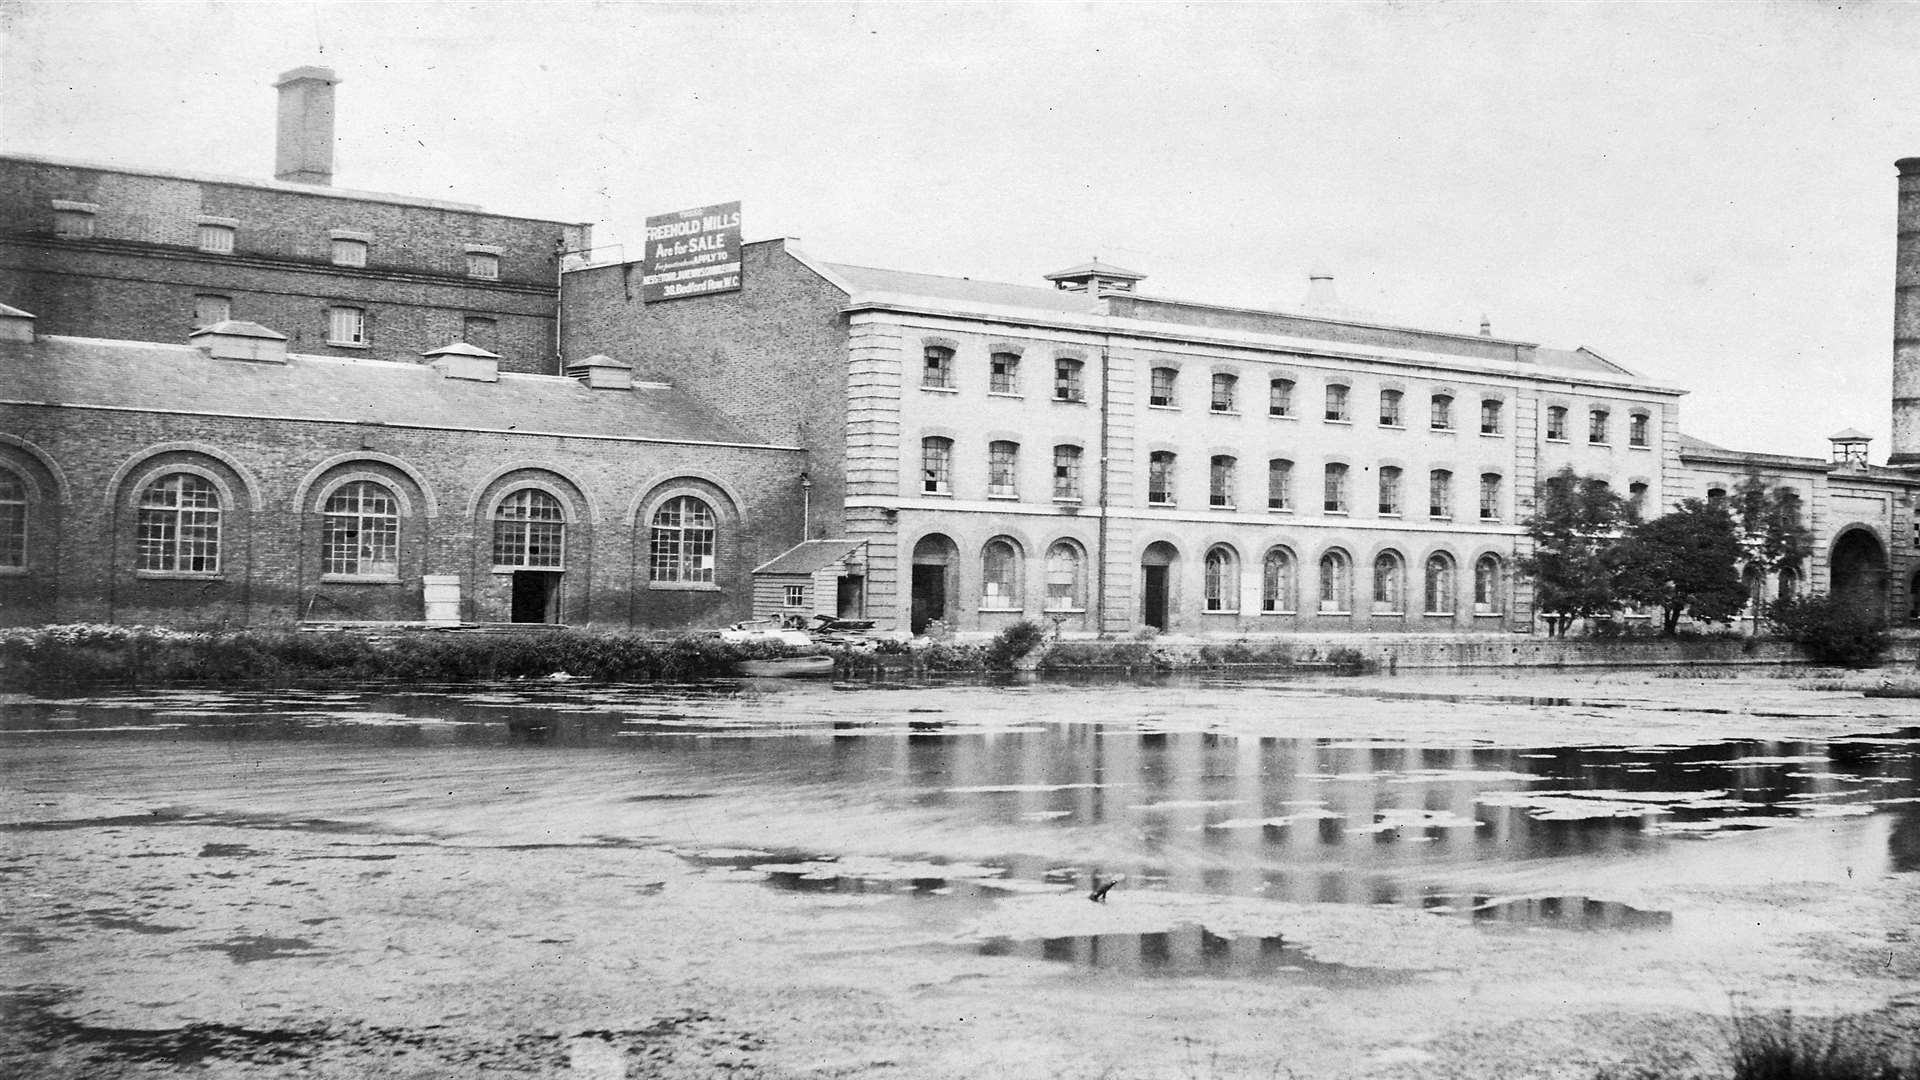 The Wellcome factory at Mill Pond in Dartford.